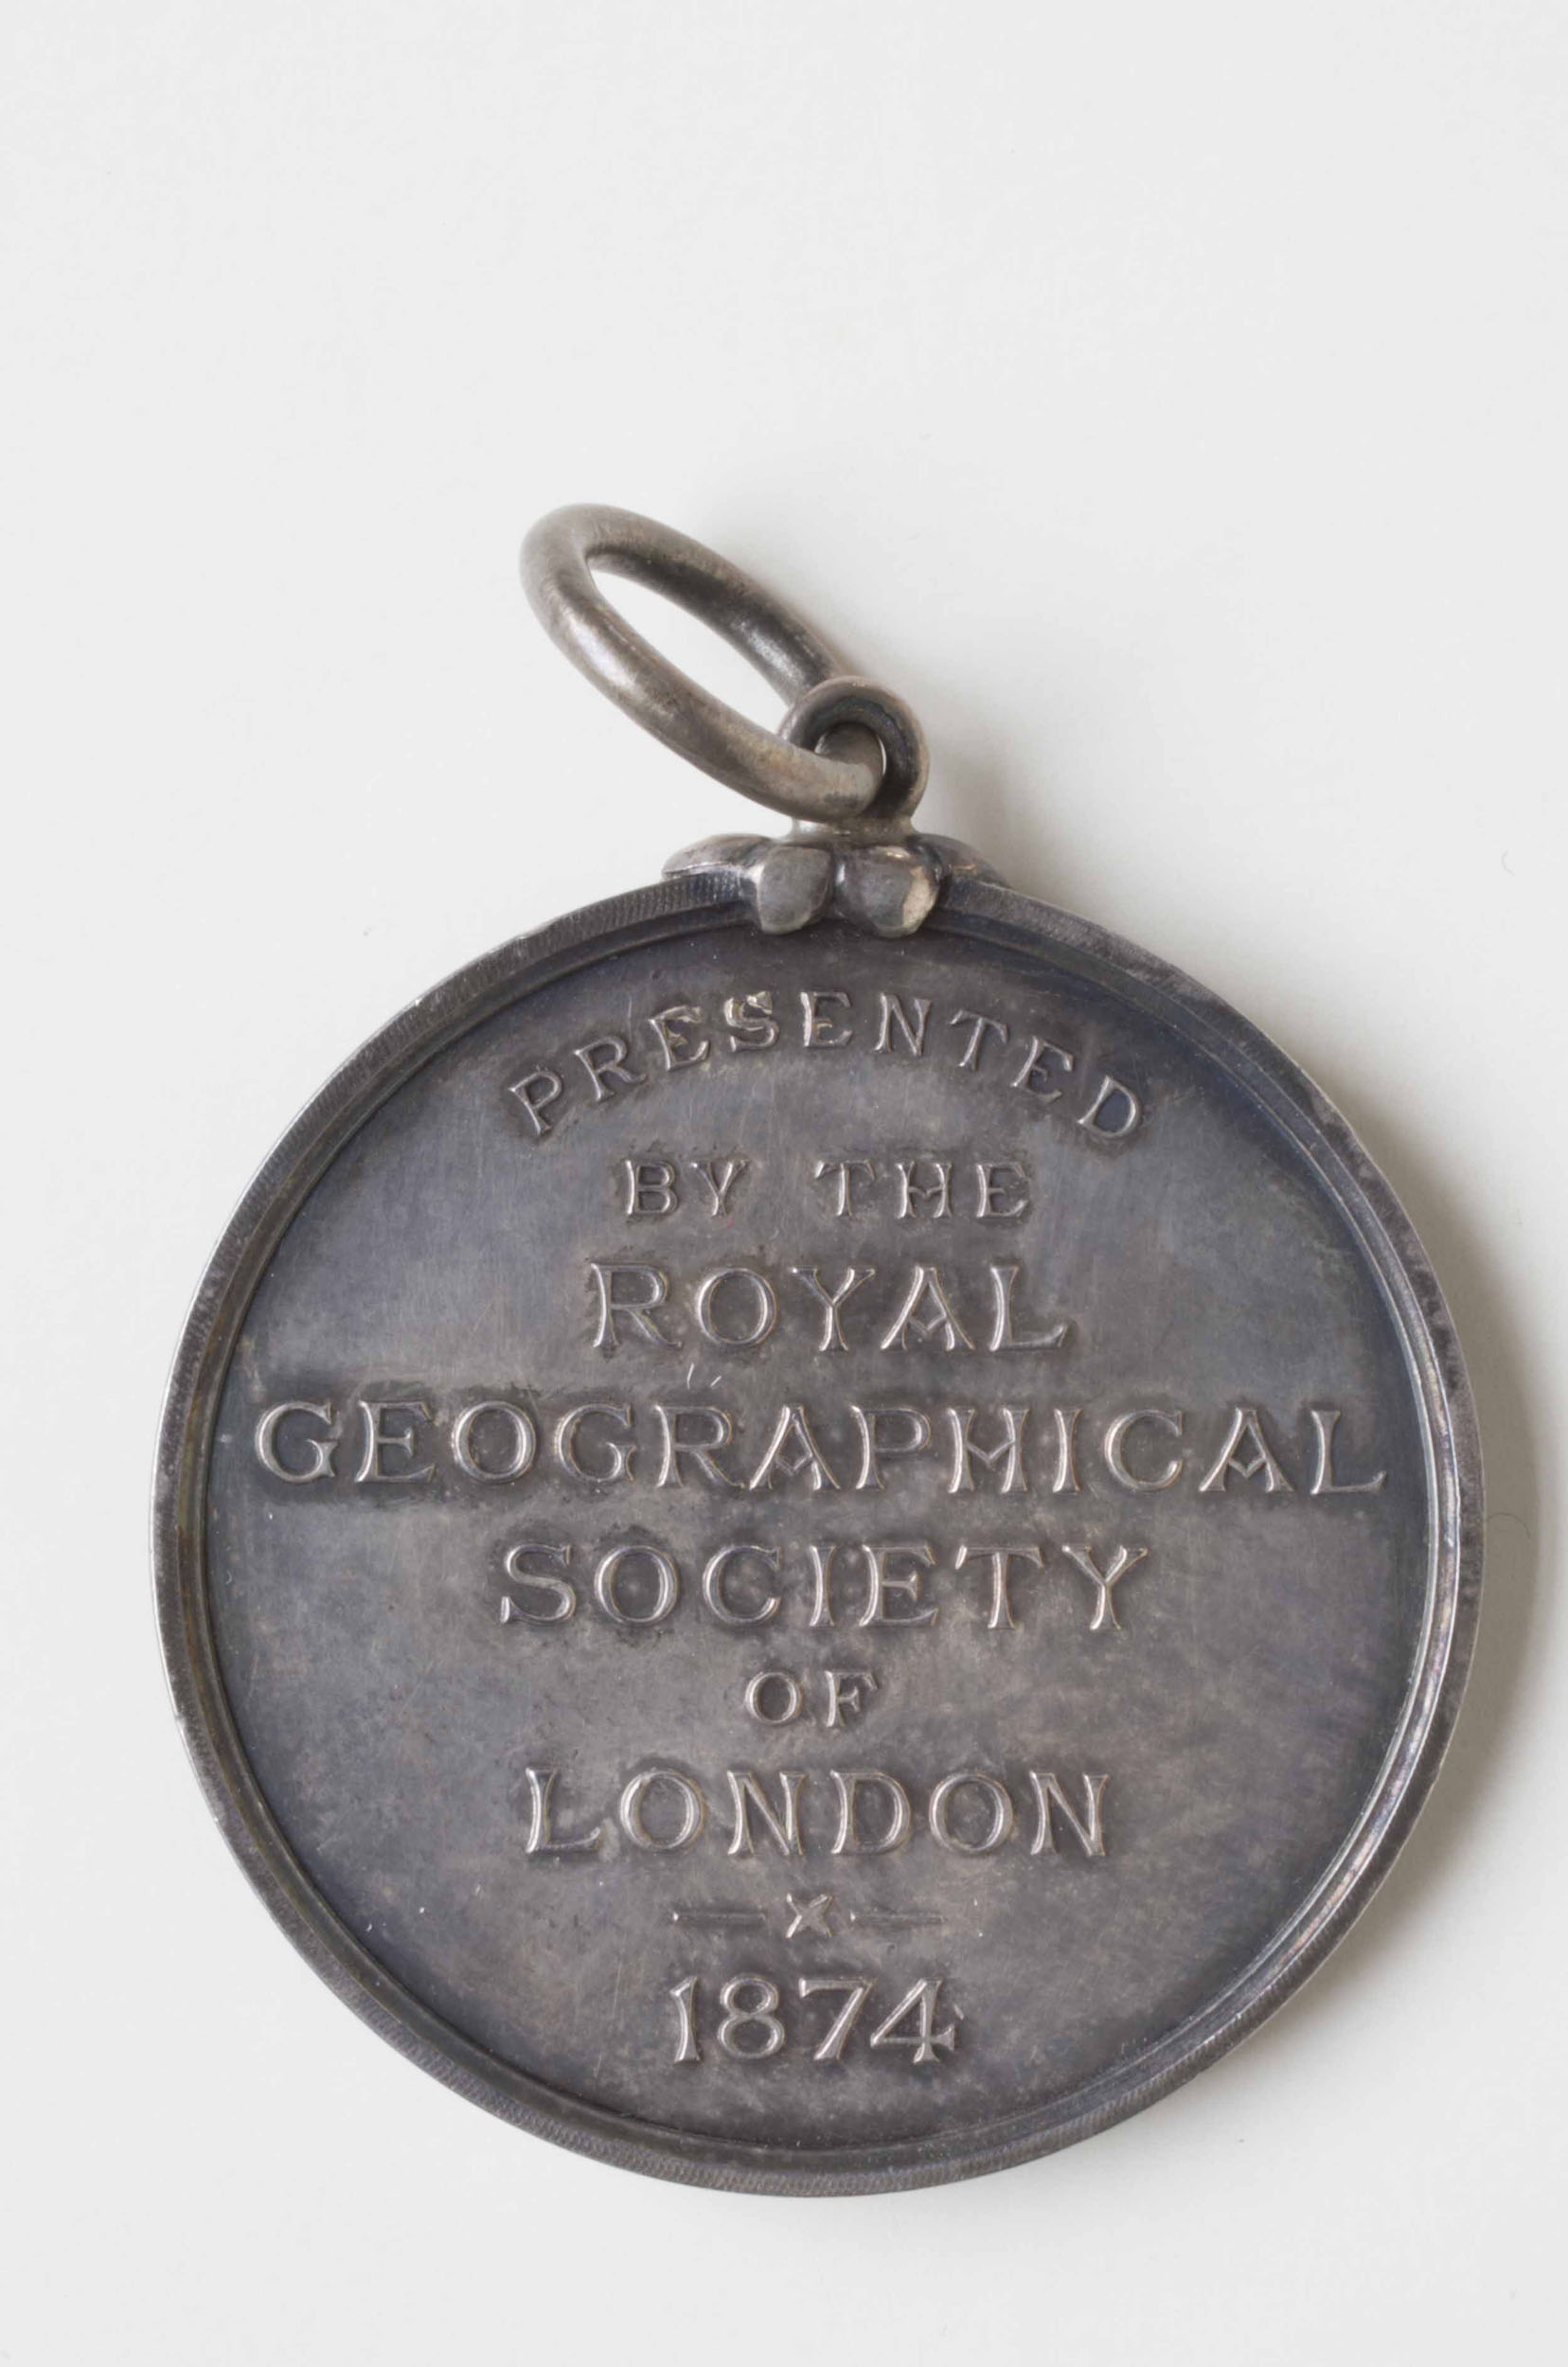 Royal Geographical Society silver medal, awarded retrospectively to each of the Africans who carried David Livingstone's body to the East Coast of Africa. Copyright David Livingstone Centre. Object images used by permission. May not be reproduced without the express written consent of the National Trust for Scotland, on behalf of the Scottish National Memorial to David Livingstone Trust. Images of the objects from the David Livingstone Centre are copyright Roddy Simpson. Creative Commons Attribution-NonCommercial 3.0 Unported (https://creativecommons.org/licenses/by-nc/3.0/).